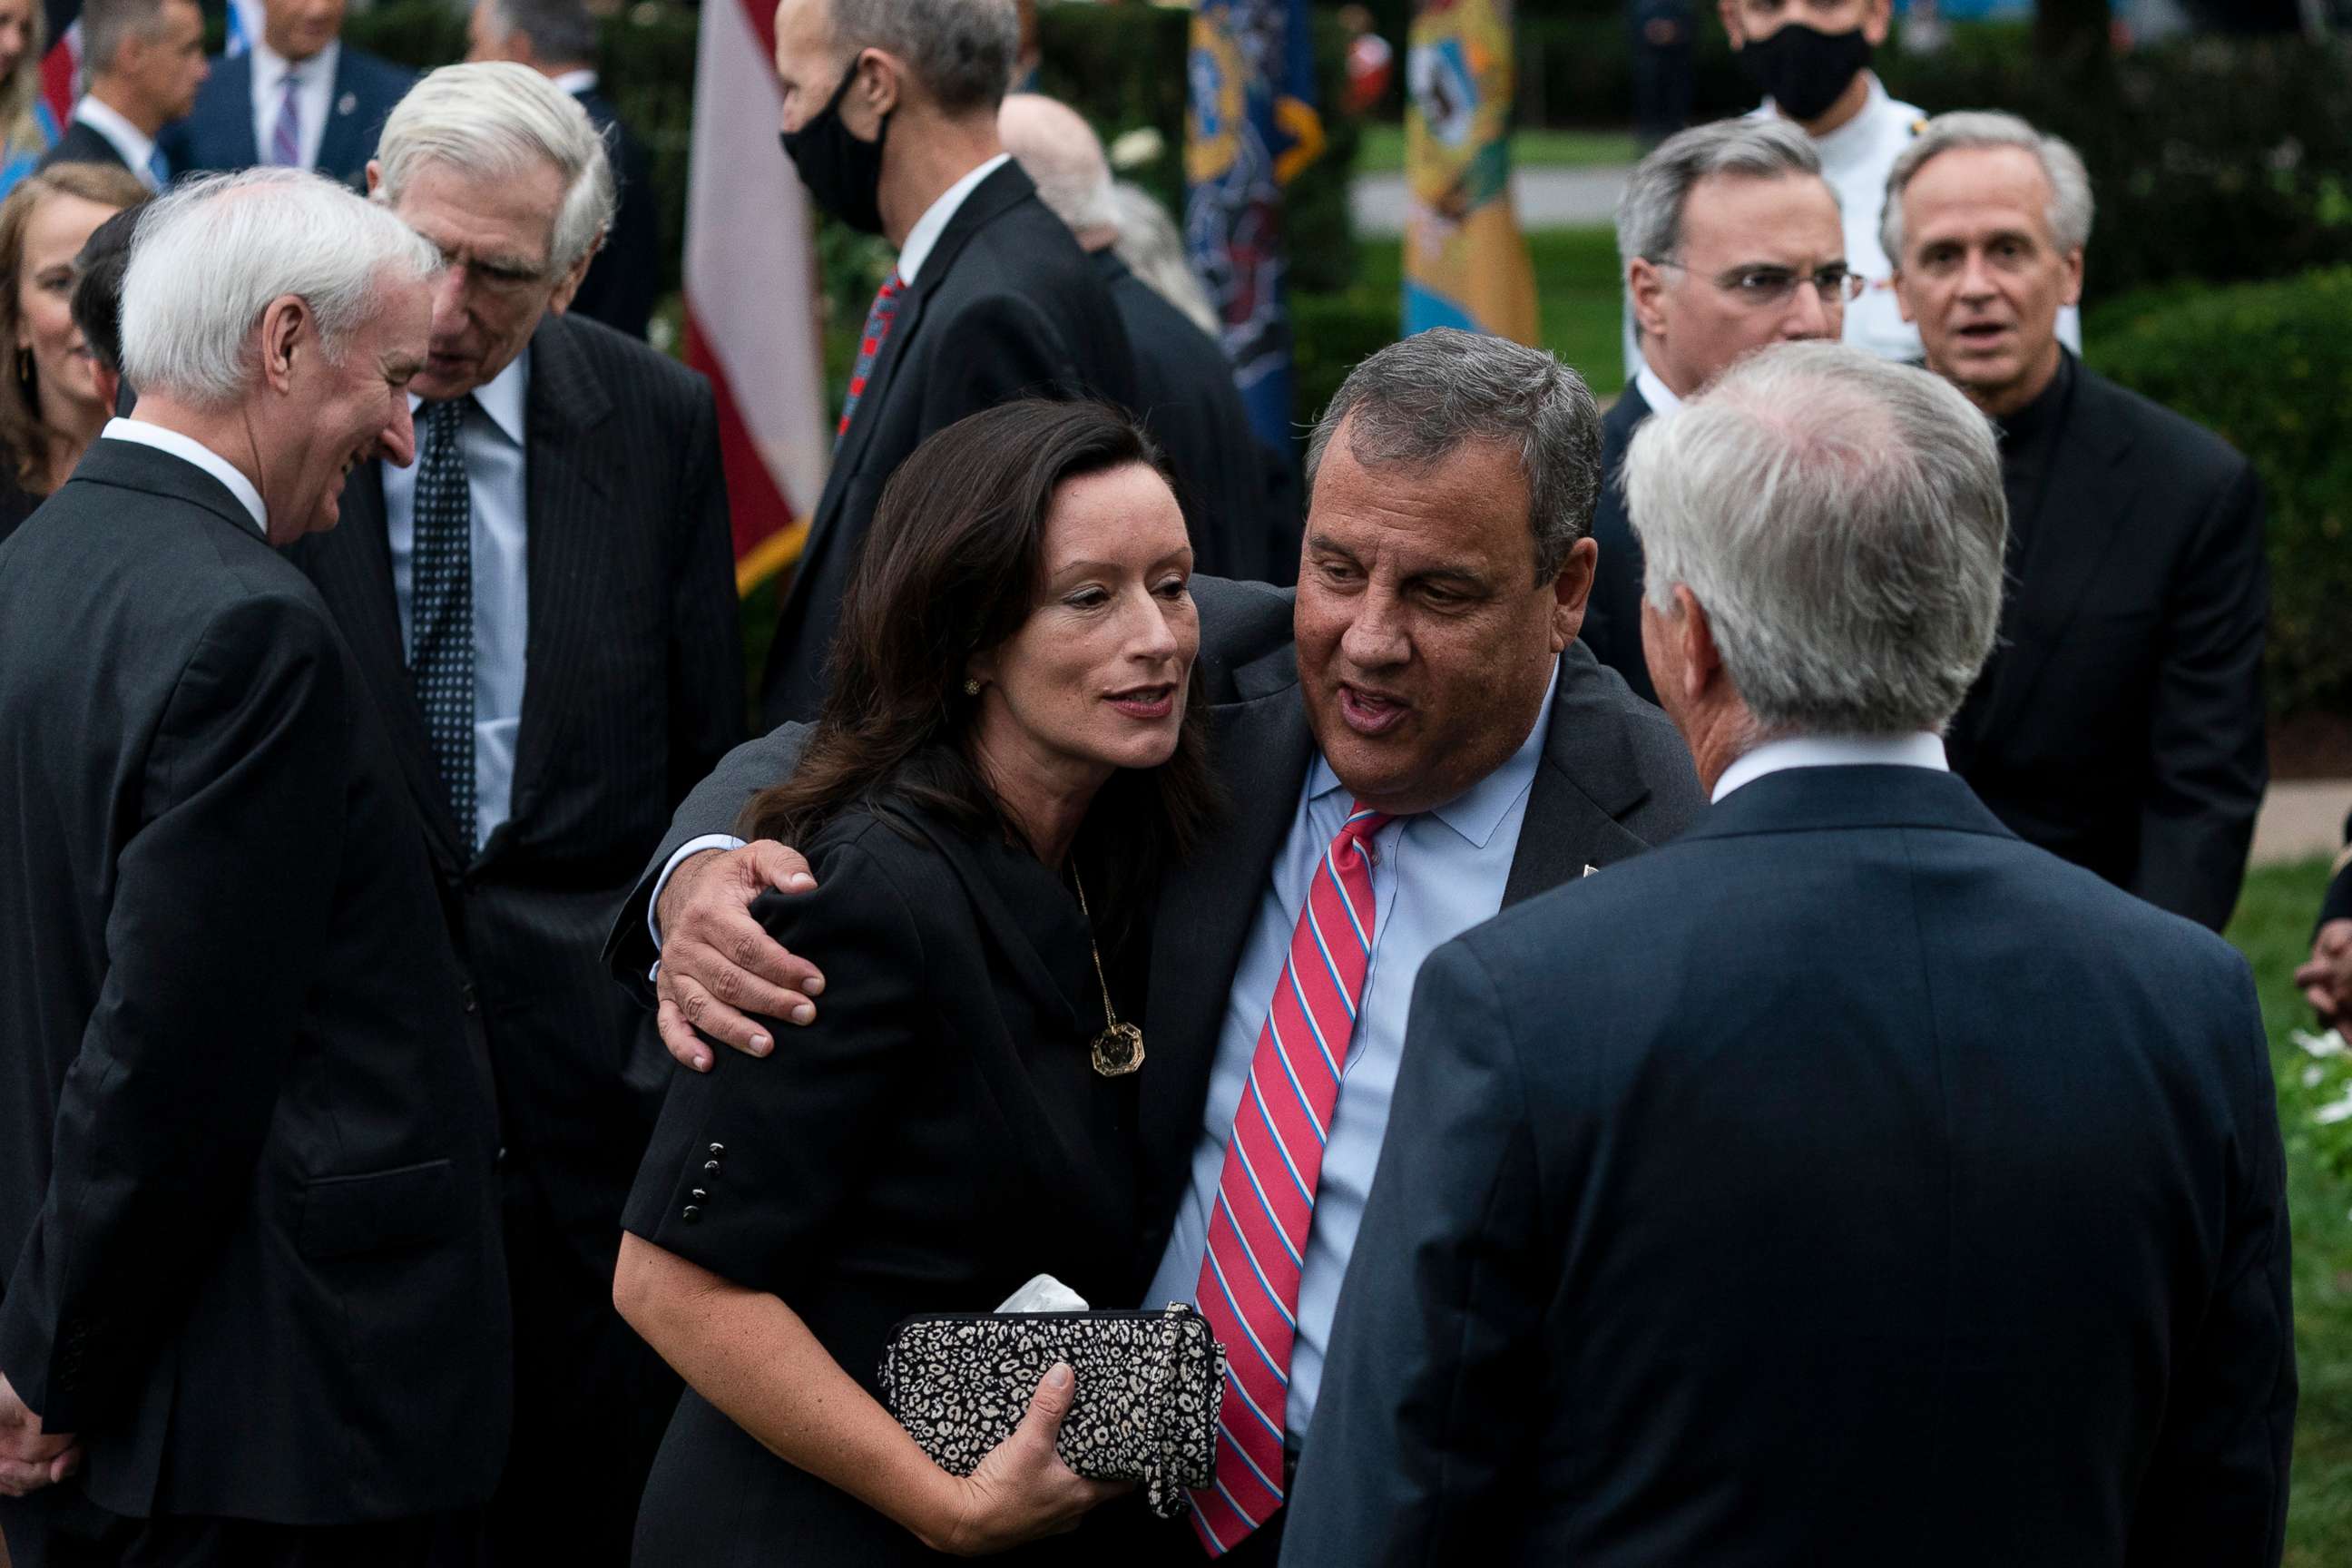 PHOTO: Former New Jersey Gov. Chris Christie speaks with others after President Donald Trump announces Judge Amy Coney Barrett as his Supreme Court nominee in the Rose Garden of the White House, in Washington, D.C., Sept. 26, 2020.